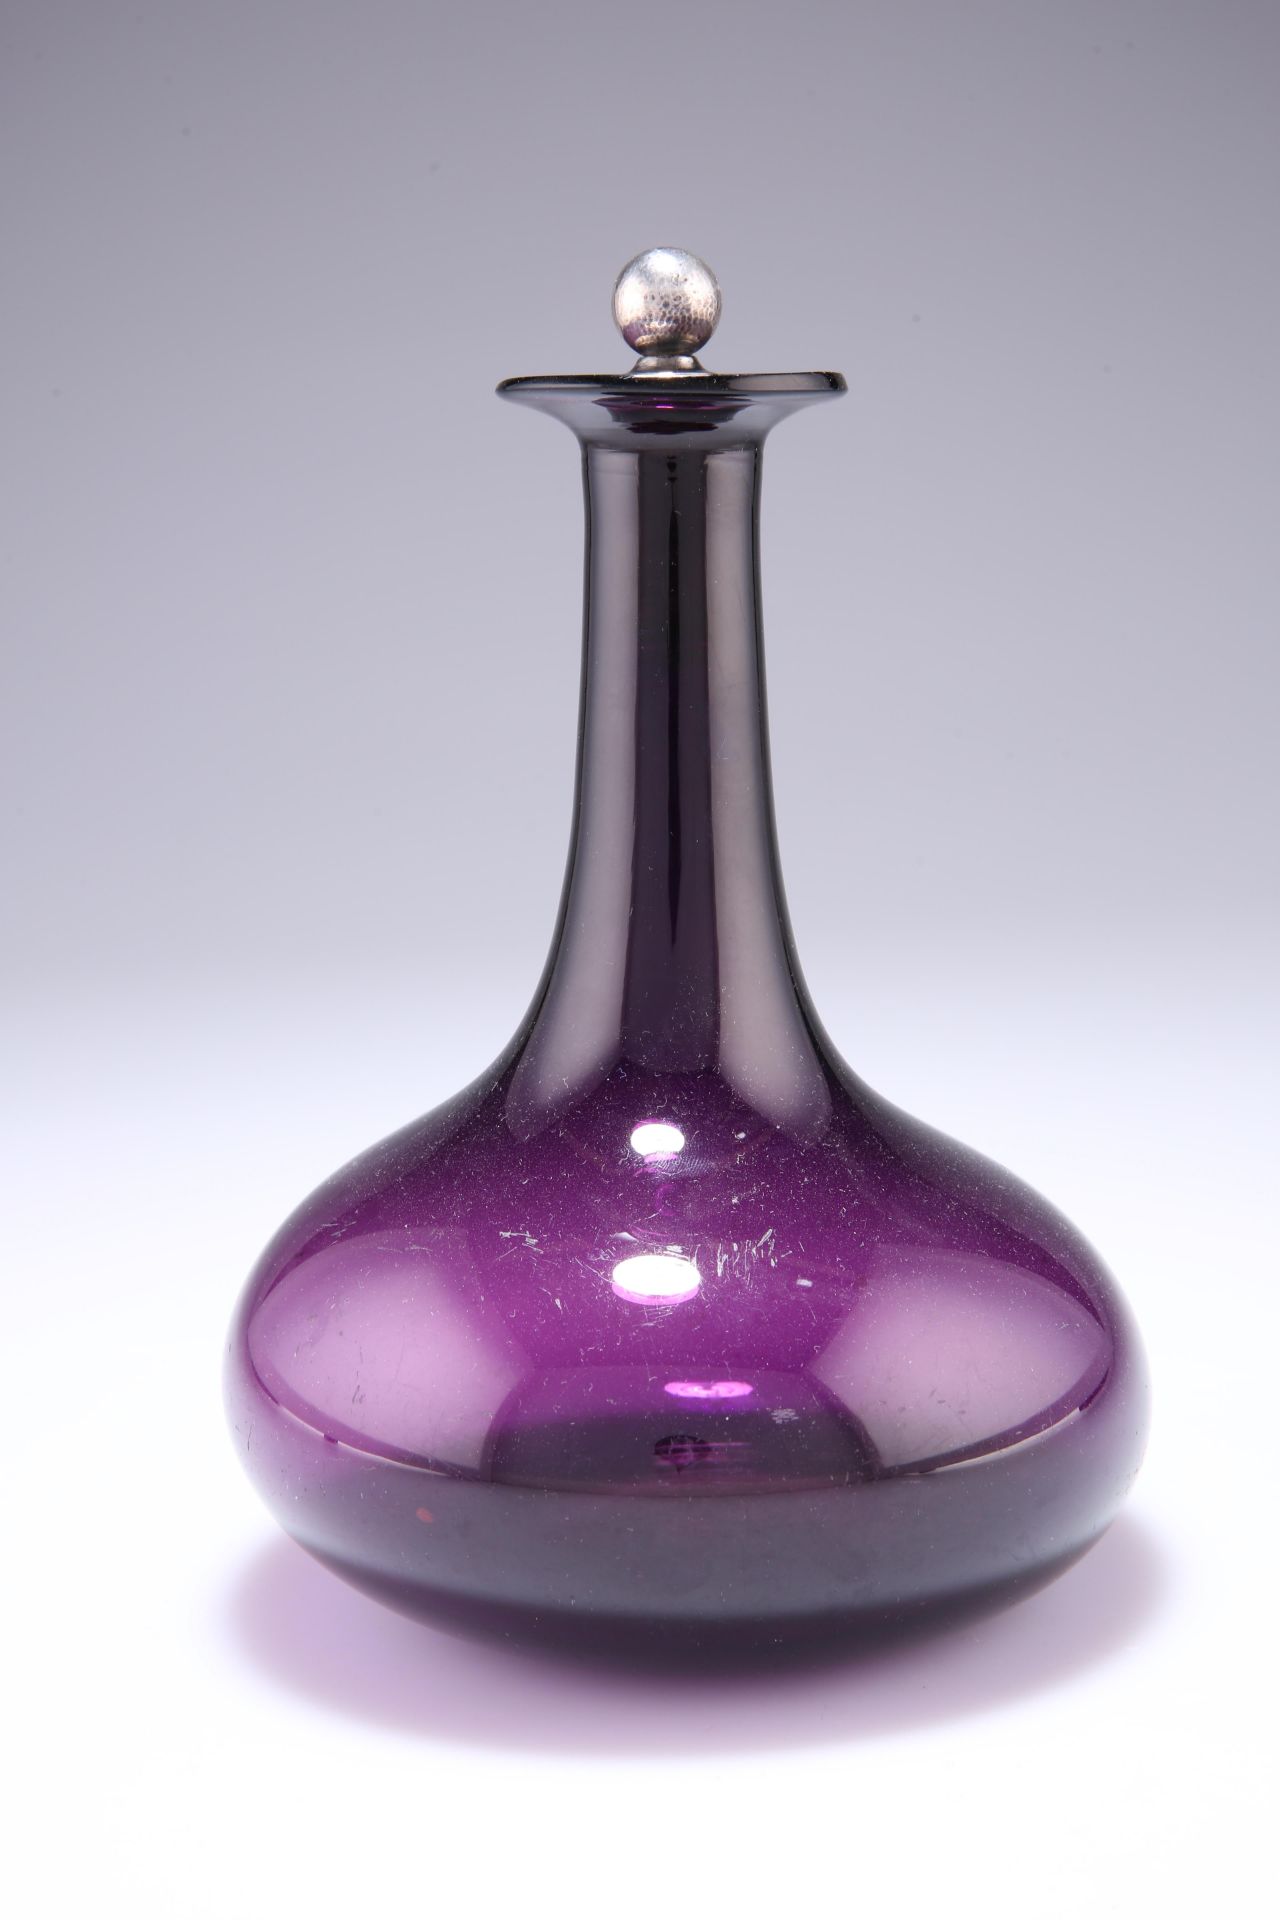 AN AMETHYST GLASS DECANTER, with hammered silver metal mounted cork stopper; A SQUARE-SECTION